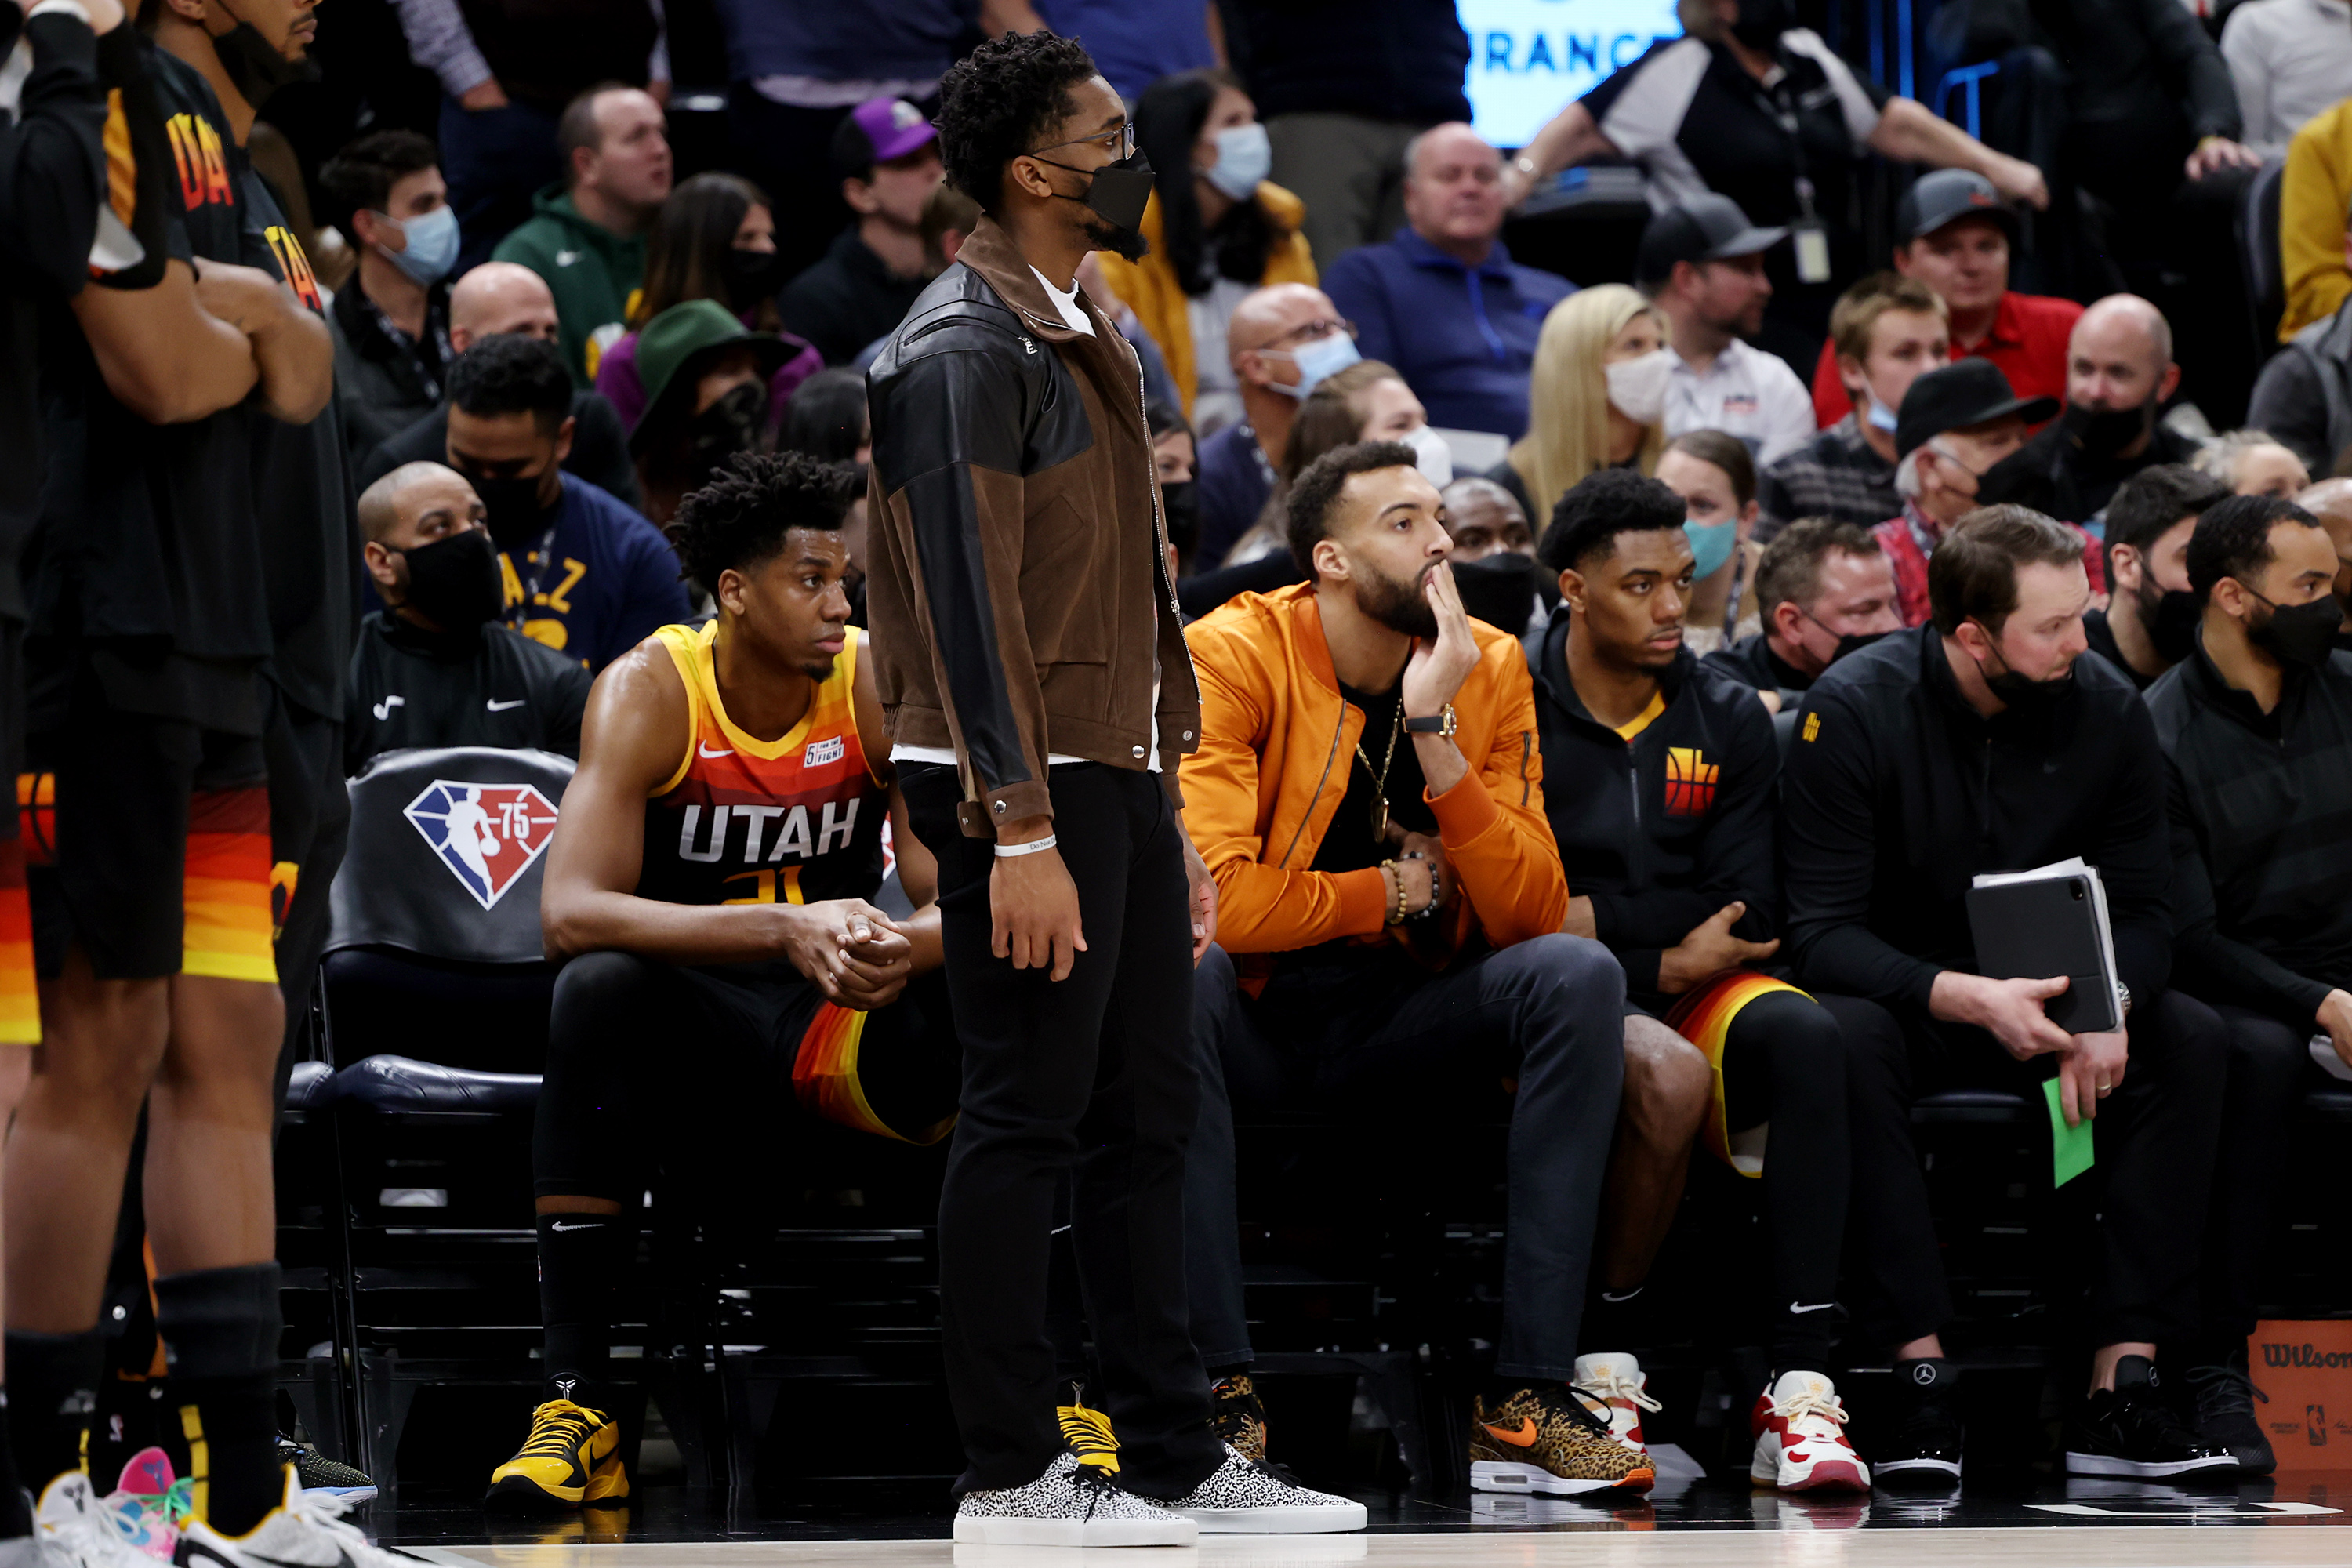 Utah Jazz’s Donovan Mitchell and Rudy Gobert watch from the bench in street clothes as Jazz and Suns play in Salt Lake City.